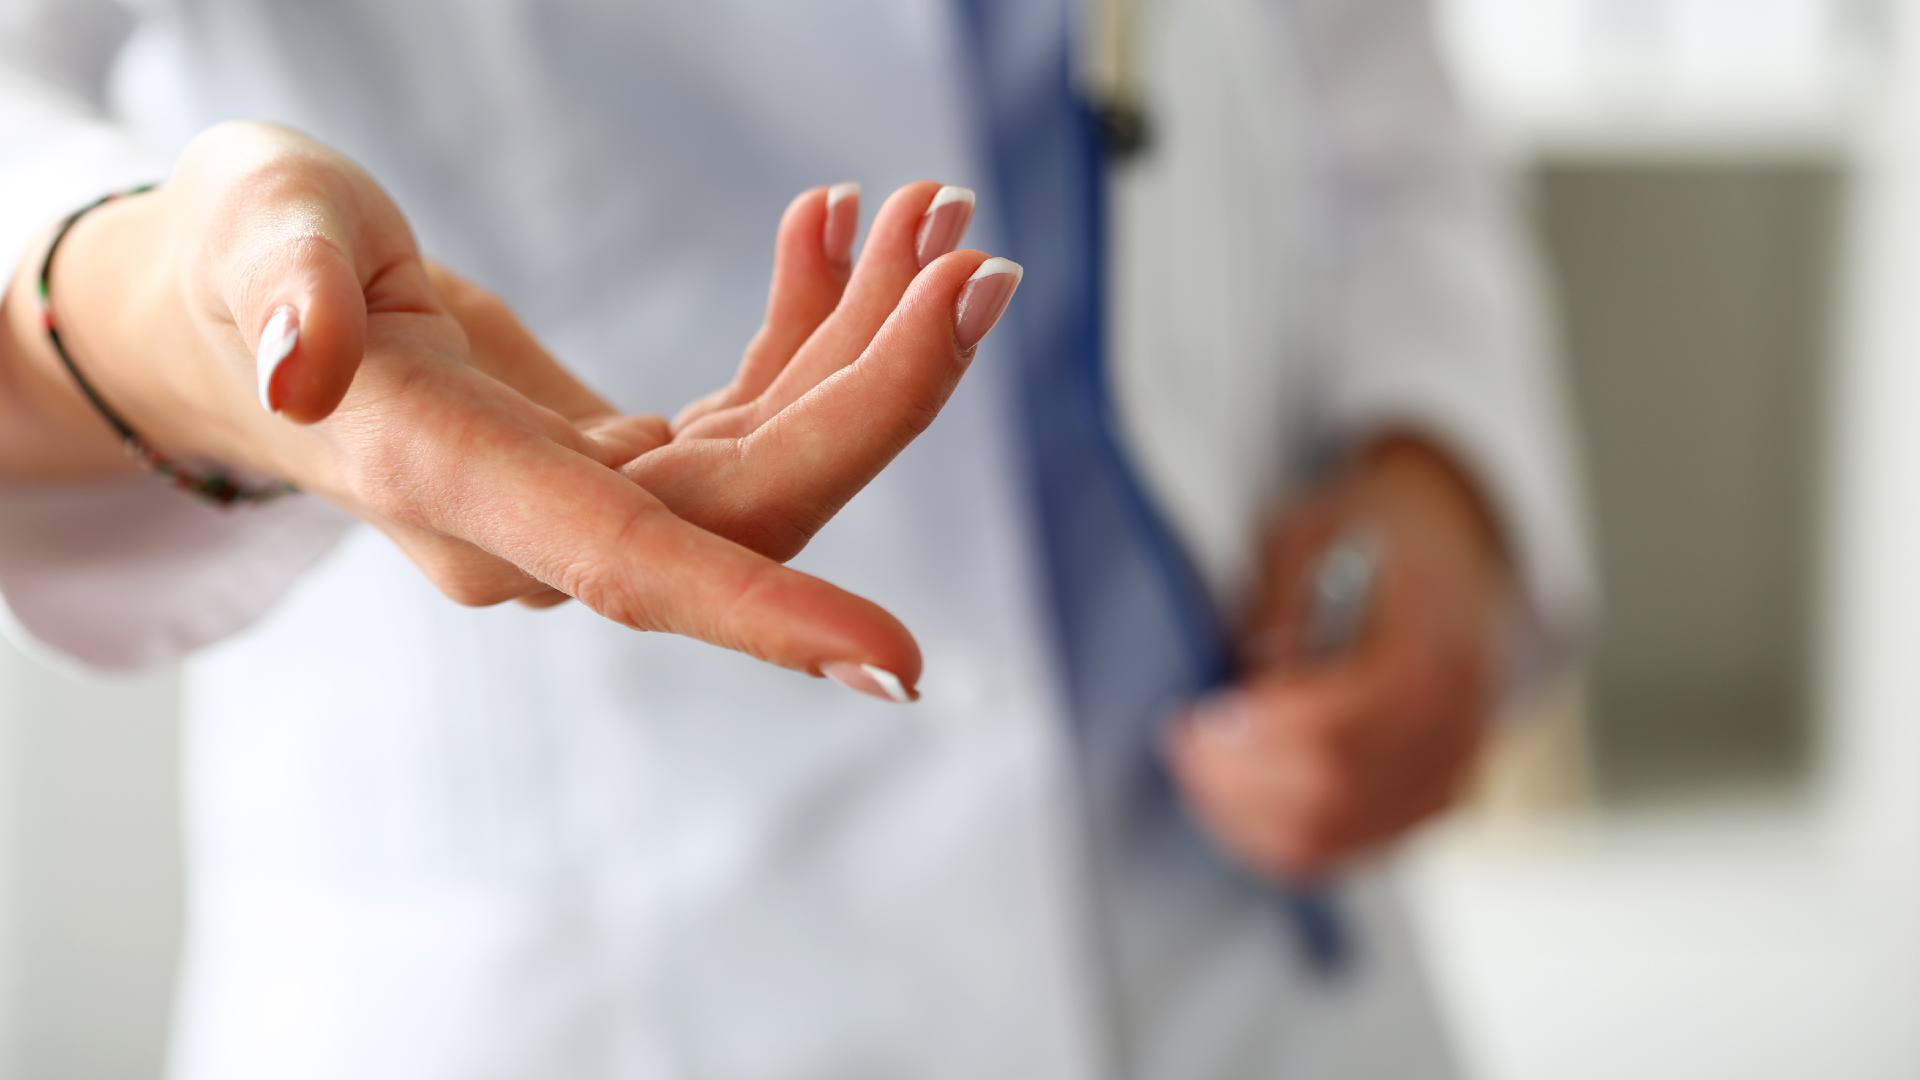 A doctor’s hand reaching out